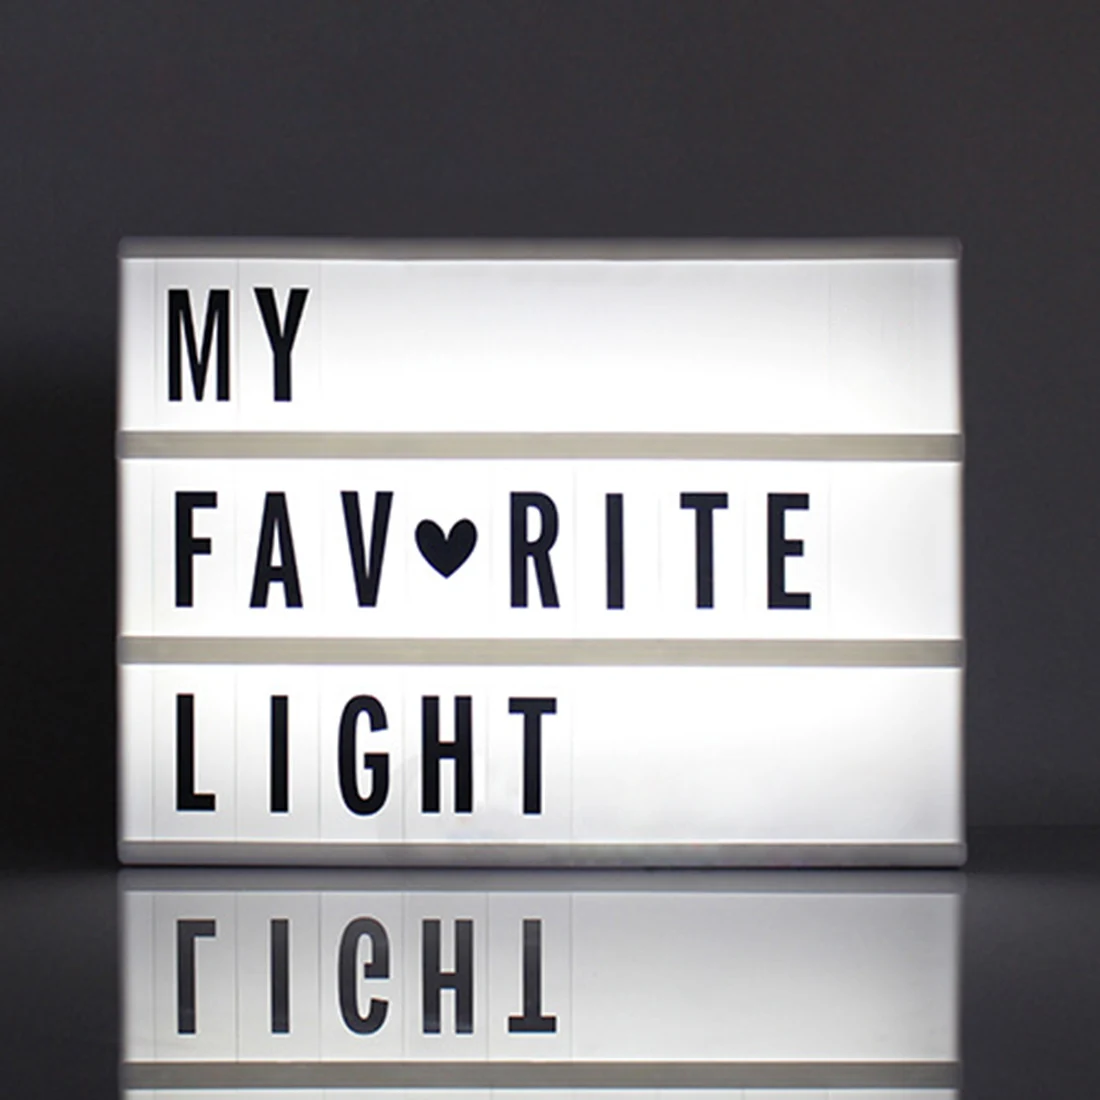 85 Letters LED Cinematic Light Box Home Party DIY Message Board Decor Bed Lamp 